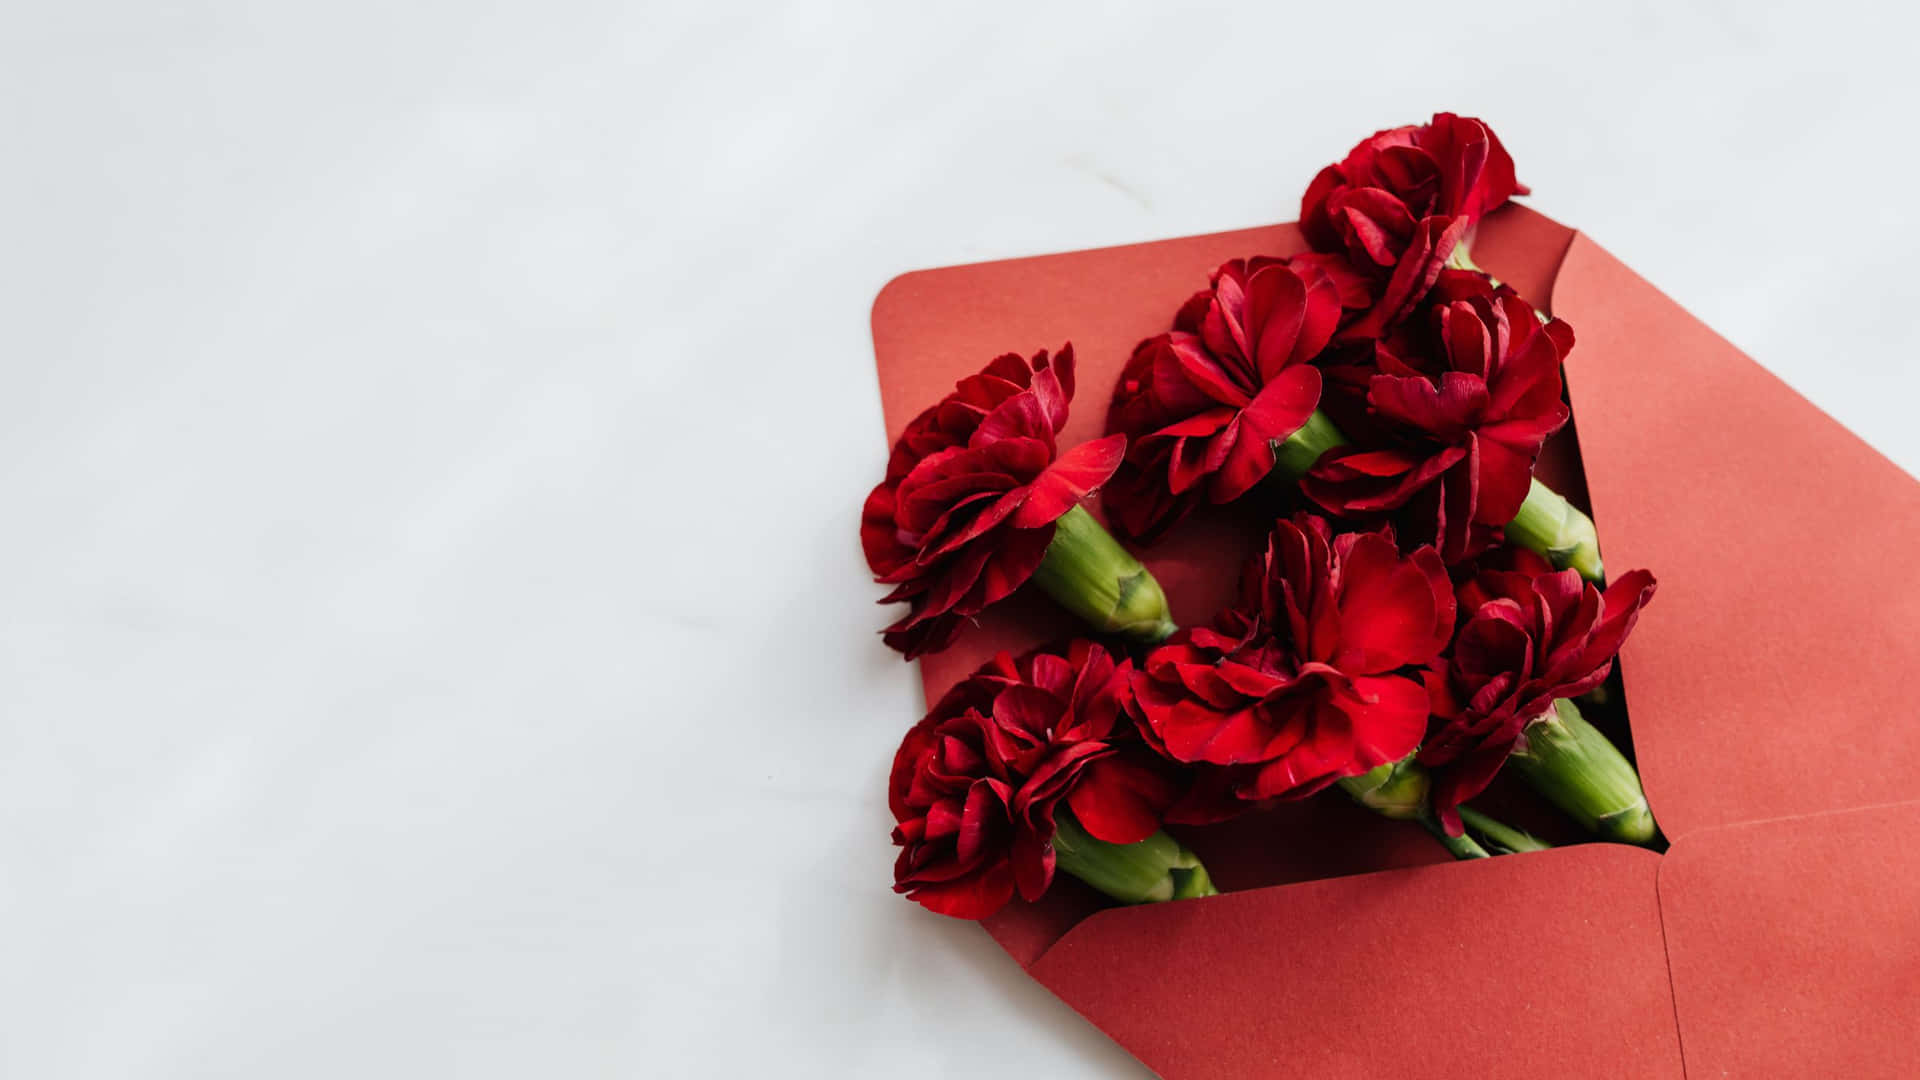 Red Carnations In An Envelope On A White Surface Background